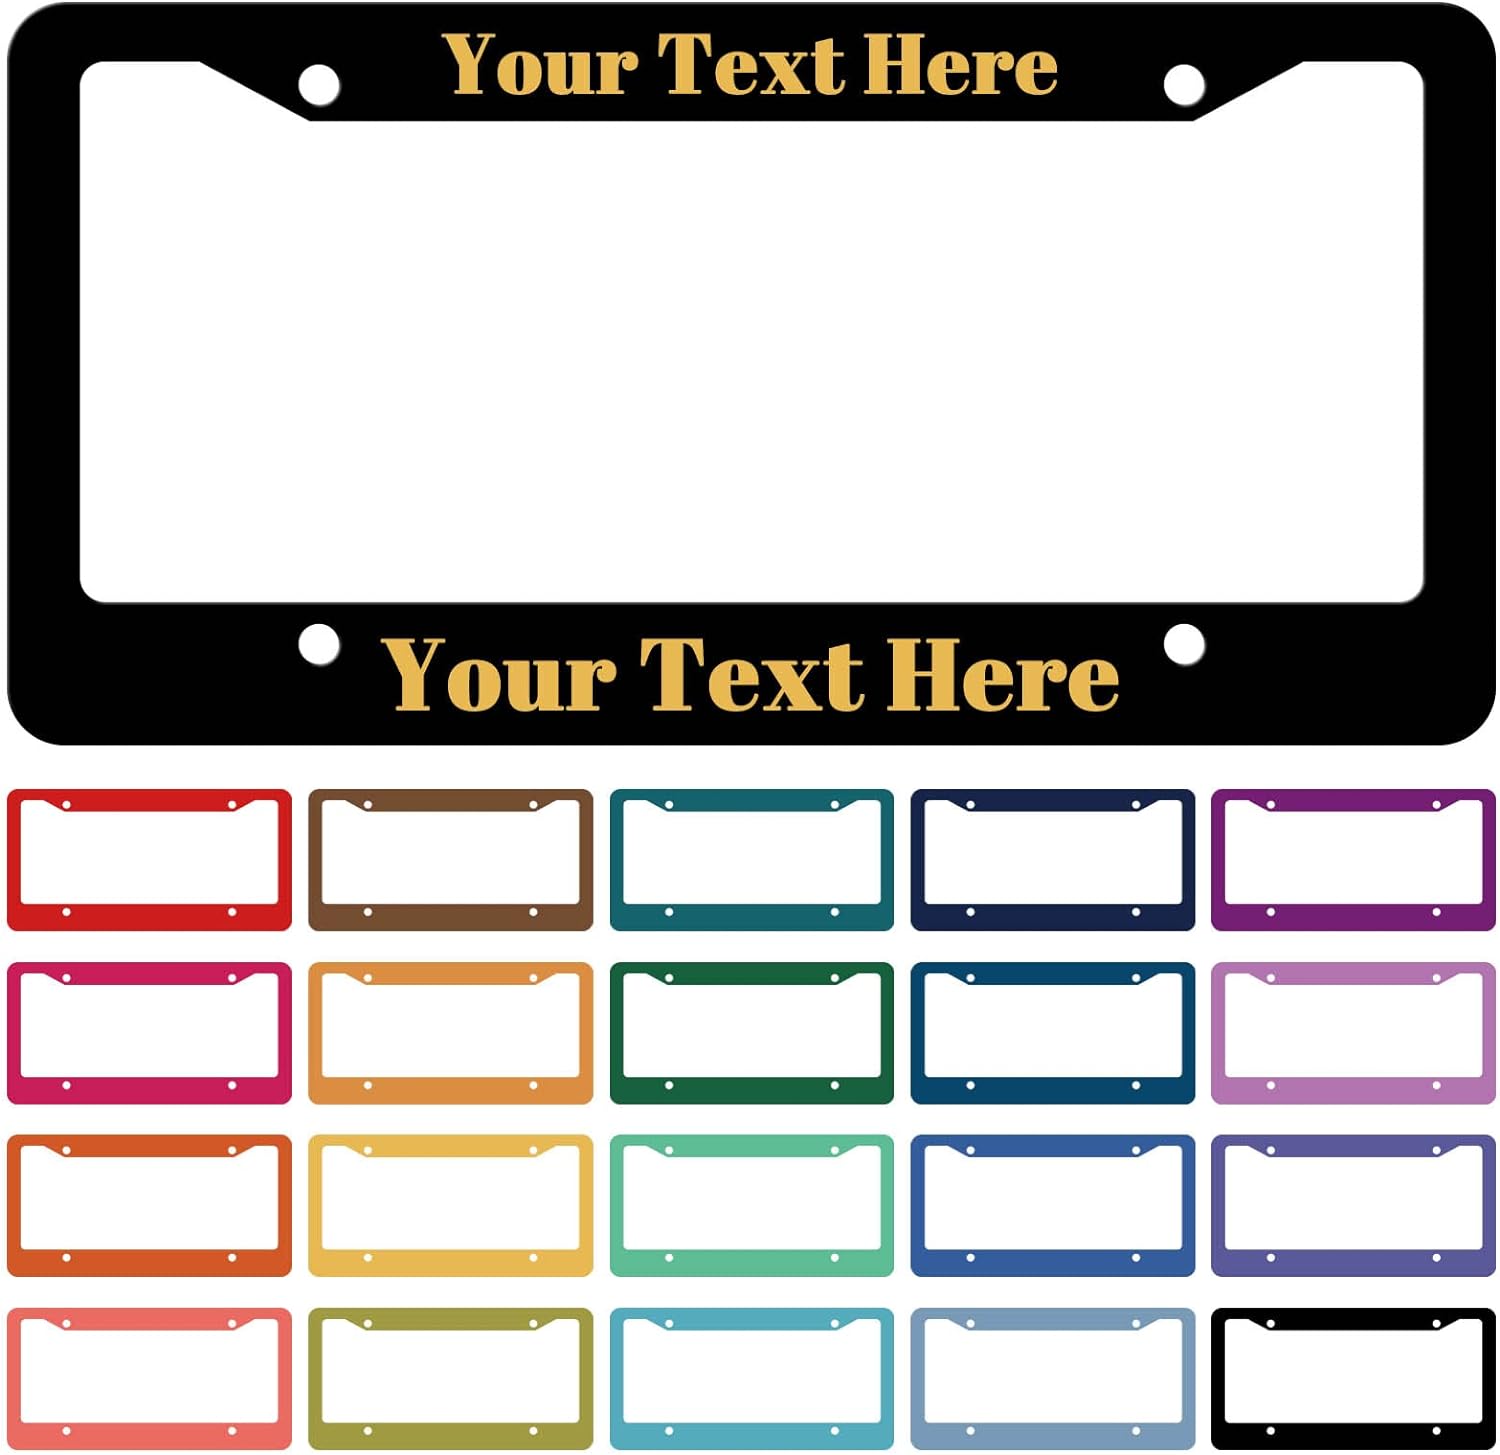 Bemaystar Personalized License Plate Frames 12x6-Make Your Own License Plate Frame with 20 Fonts and Colors,Custom License Plate Holder A